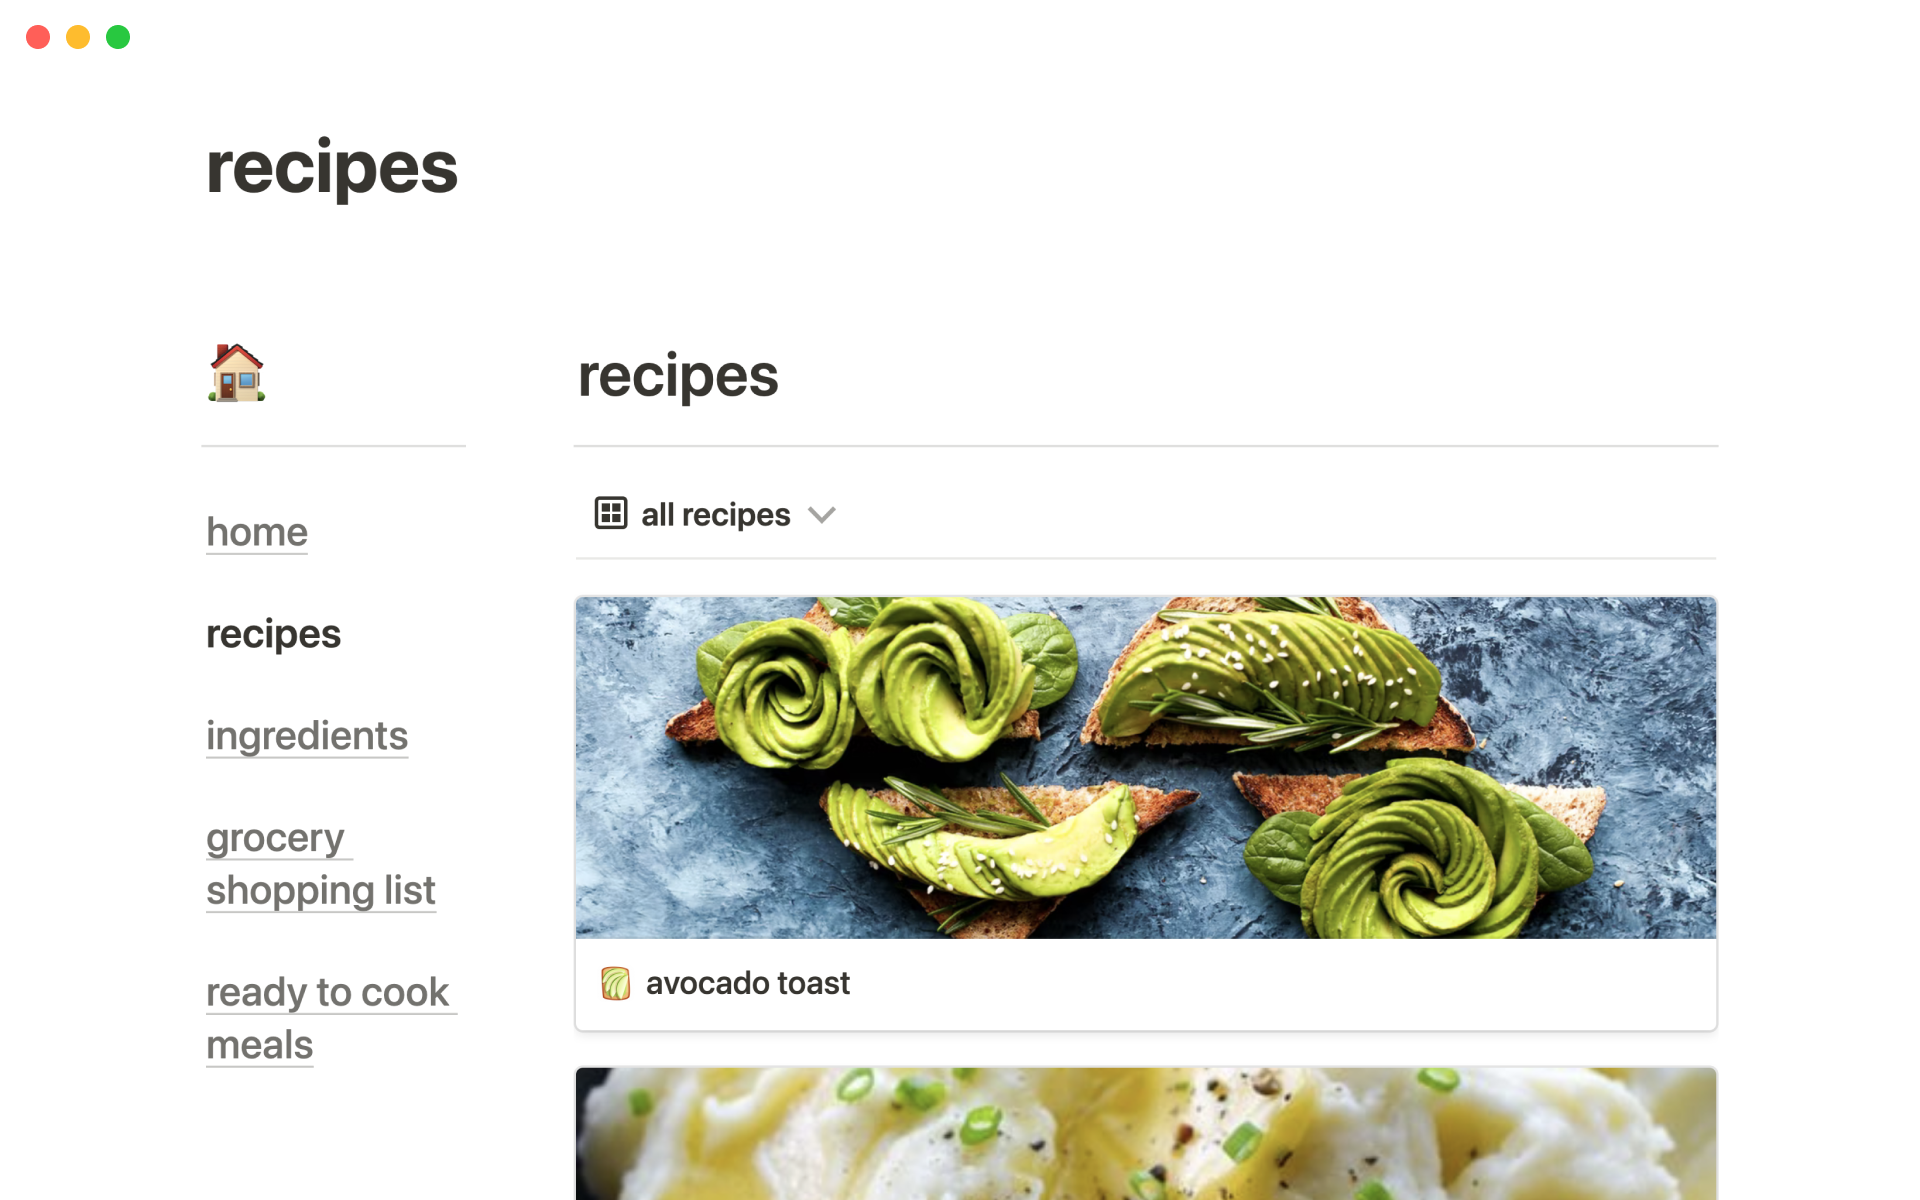 A simple meal planner that helps you organize saved recipes, autogenerate grocery lists, and more.